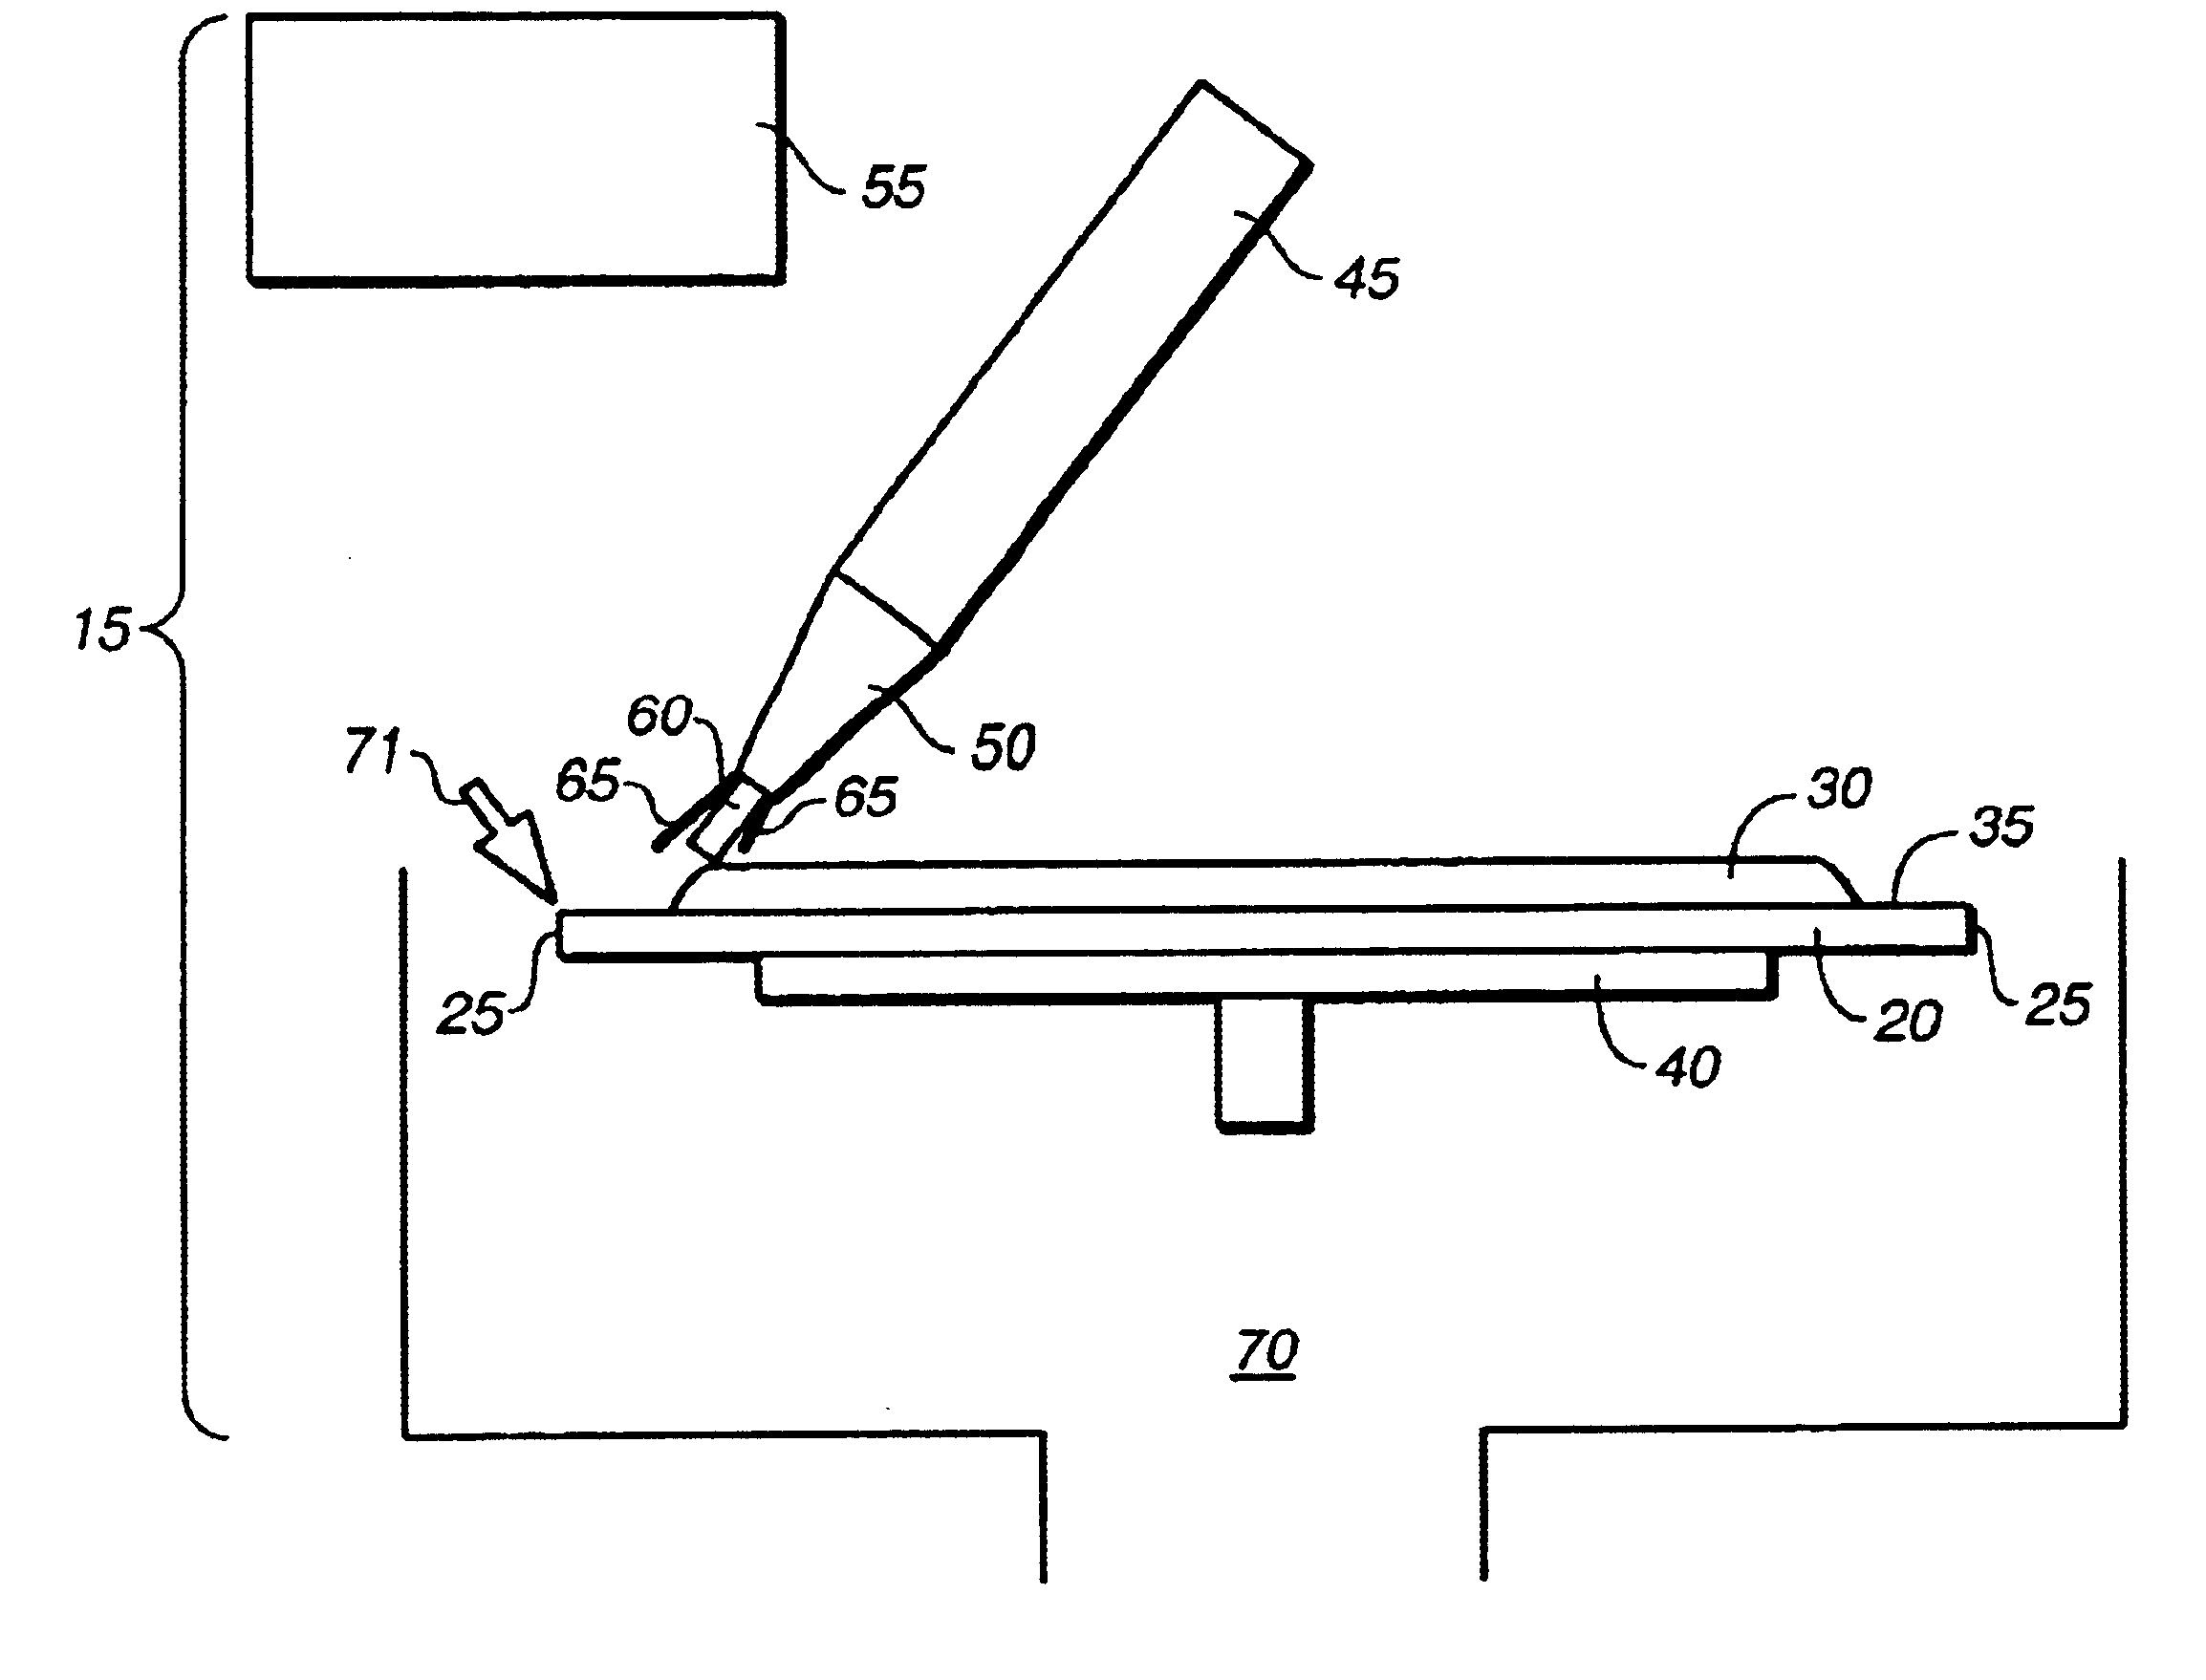 Method to use a laser to perform the edge clean operation on a semiconductor wafer